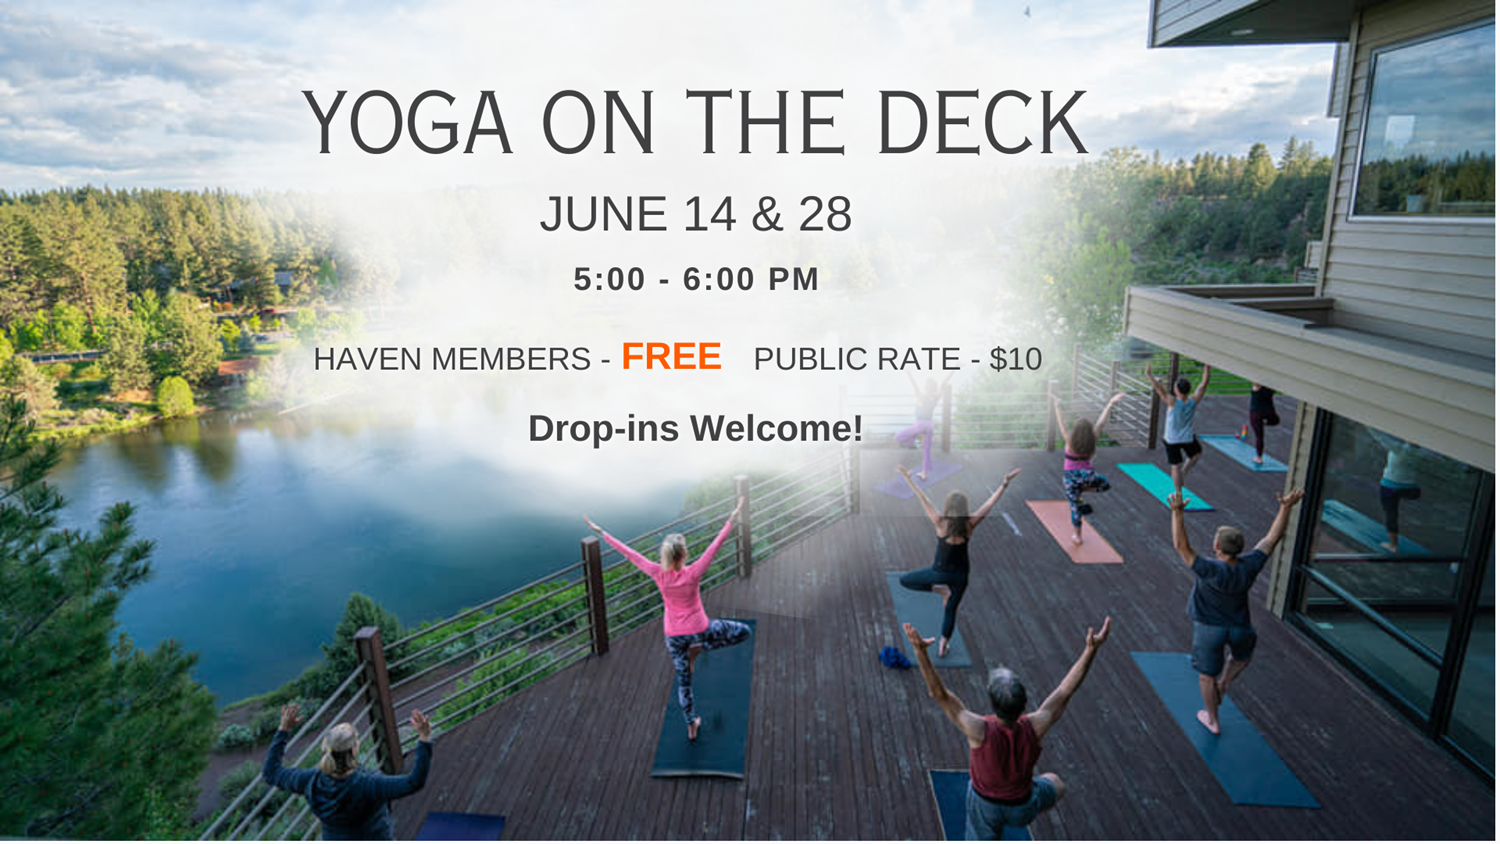 Yoga on The Deck- Free for members